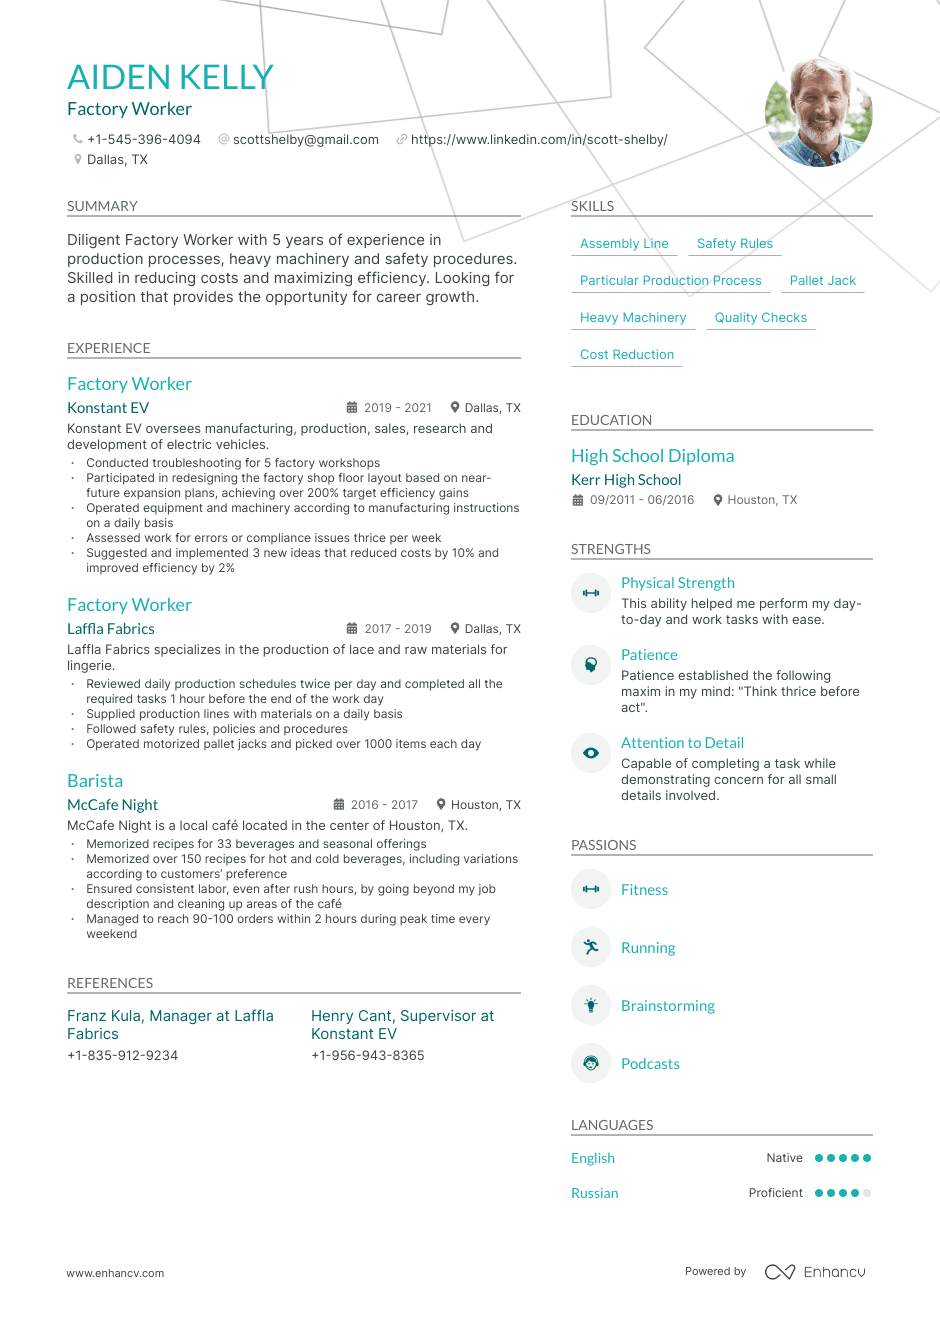 Factory Worker resume example